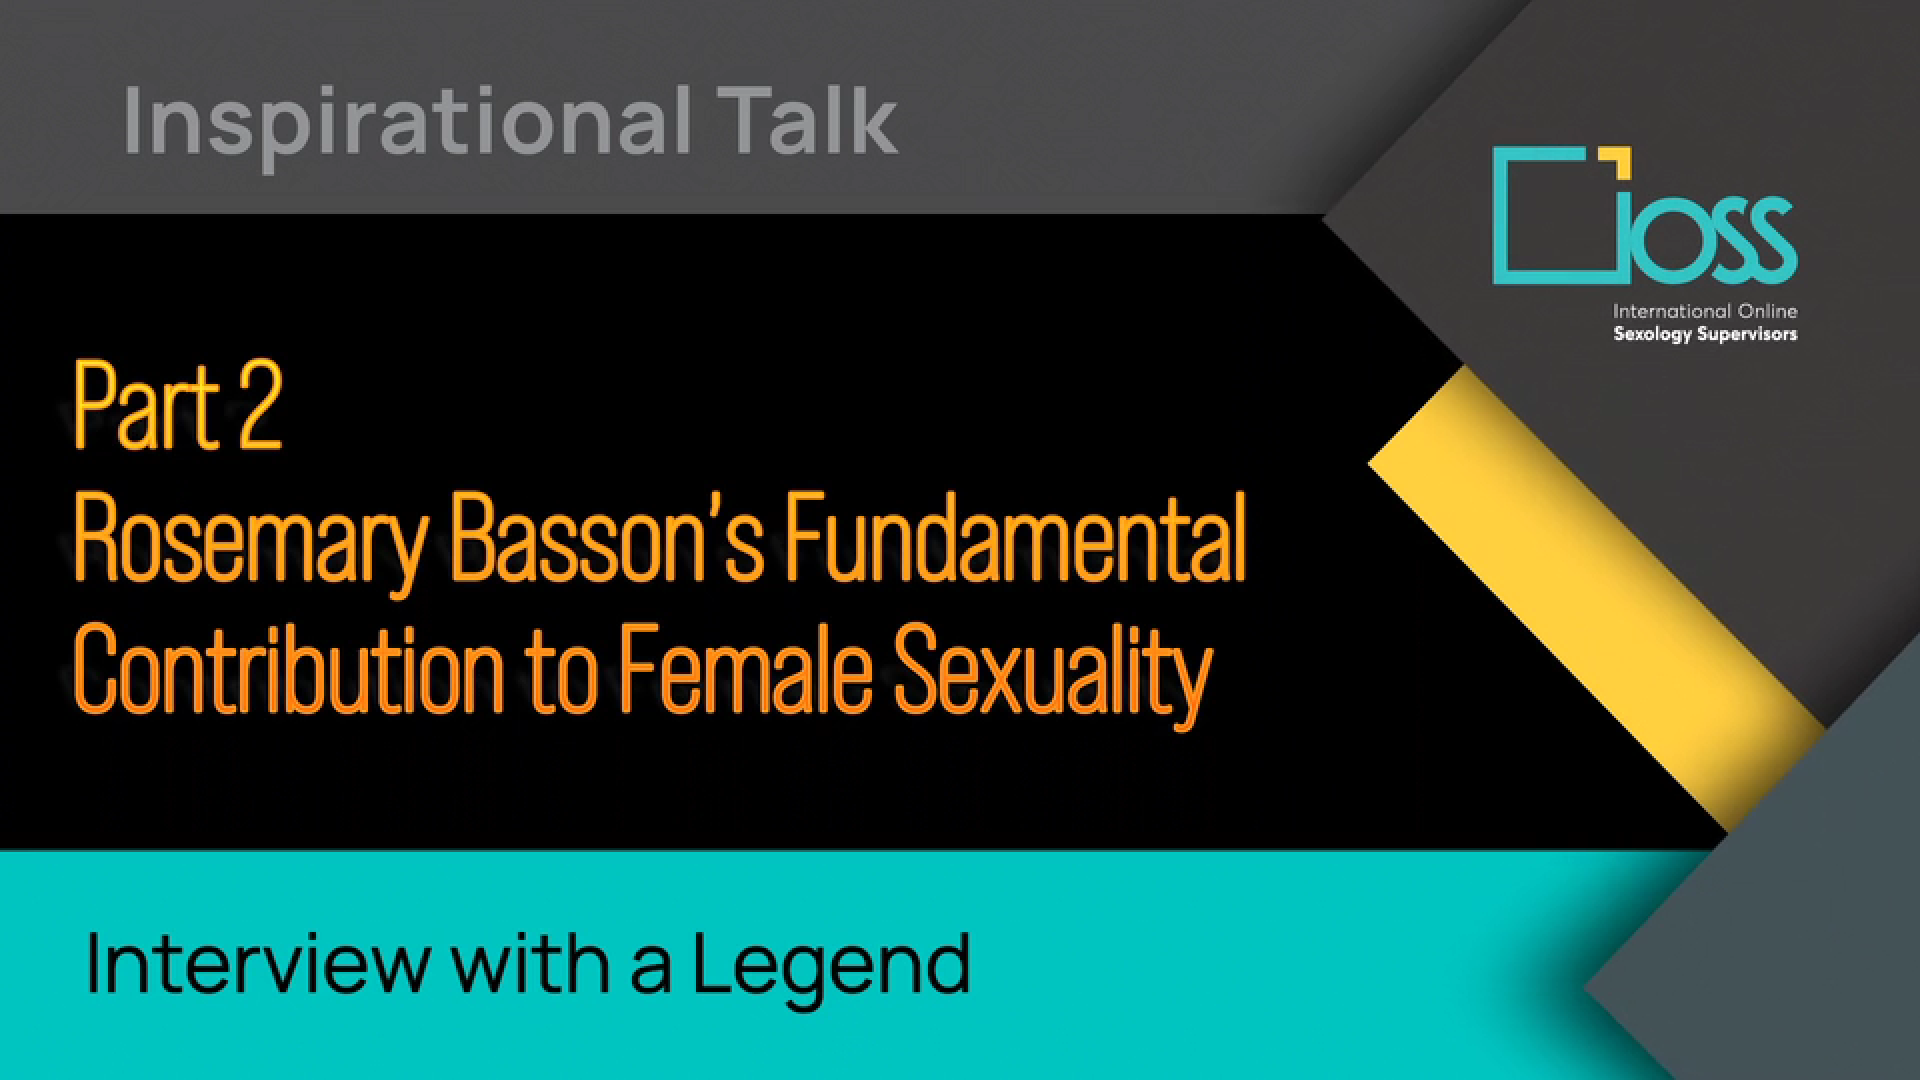 Part 2 Rosemary Basson’s Fundamental Contribution to Female Sexuality (Part 1 & 2)